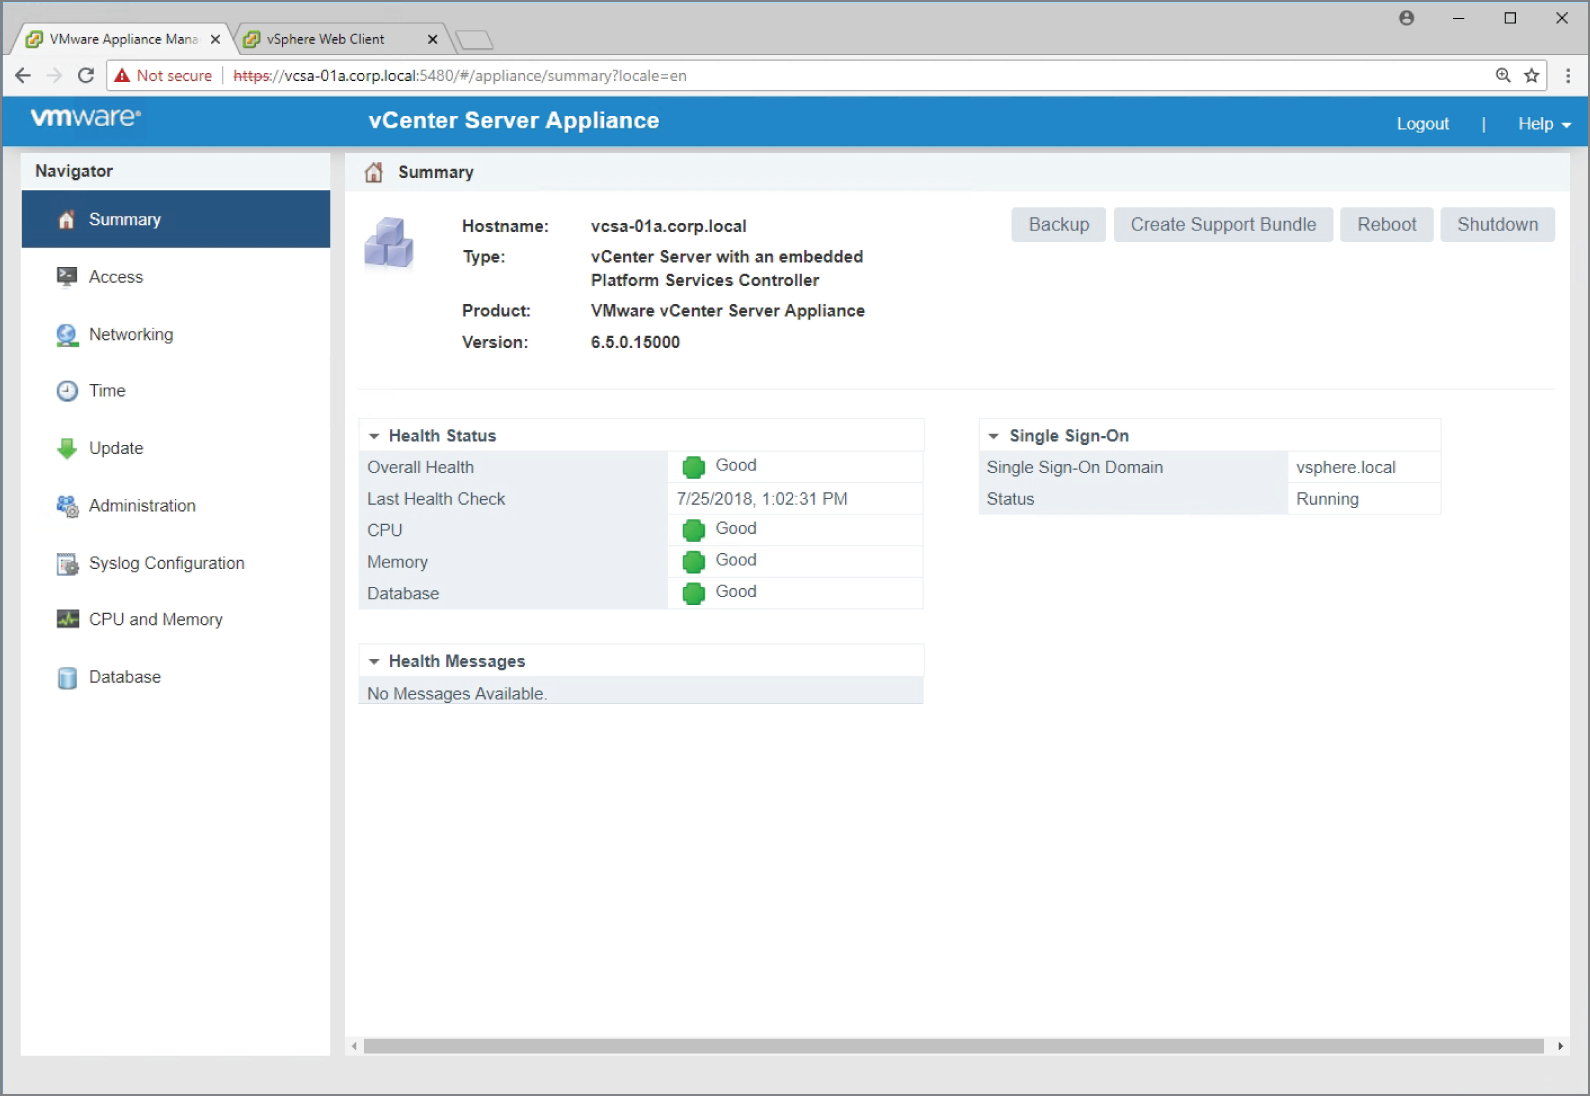 Snapshot of connecting to the management interface of the vCenter appliance.